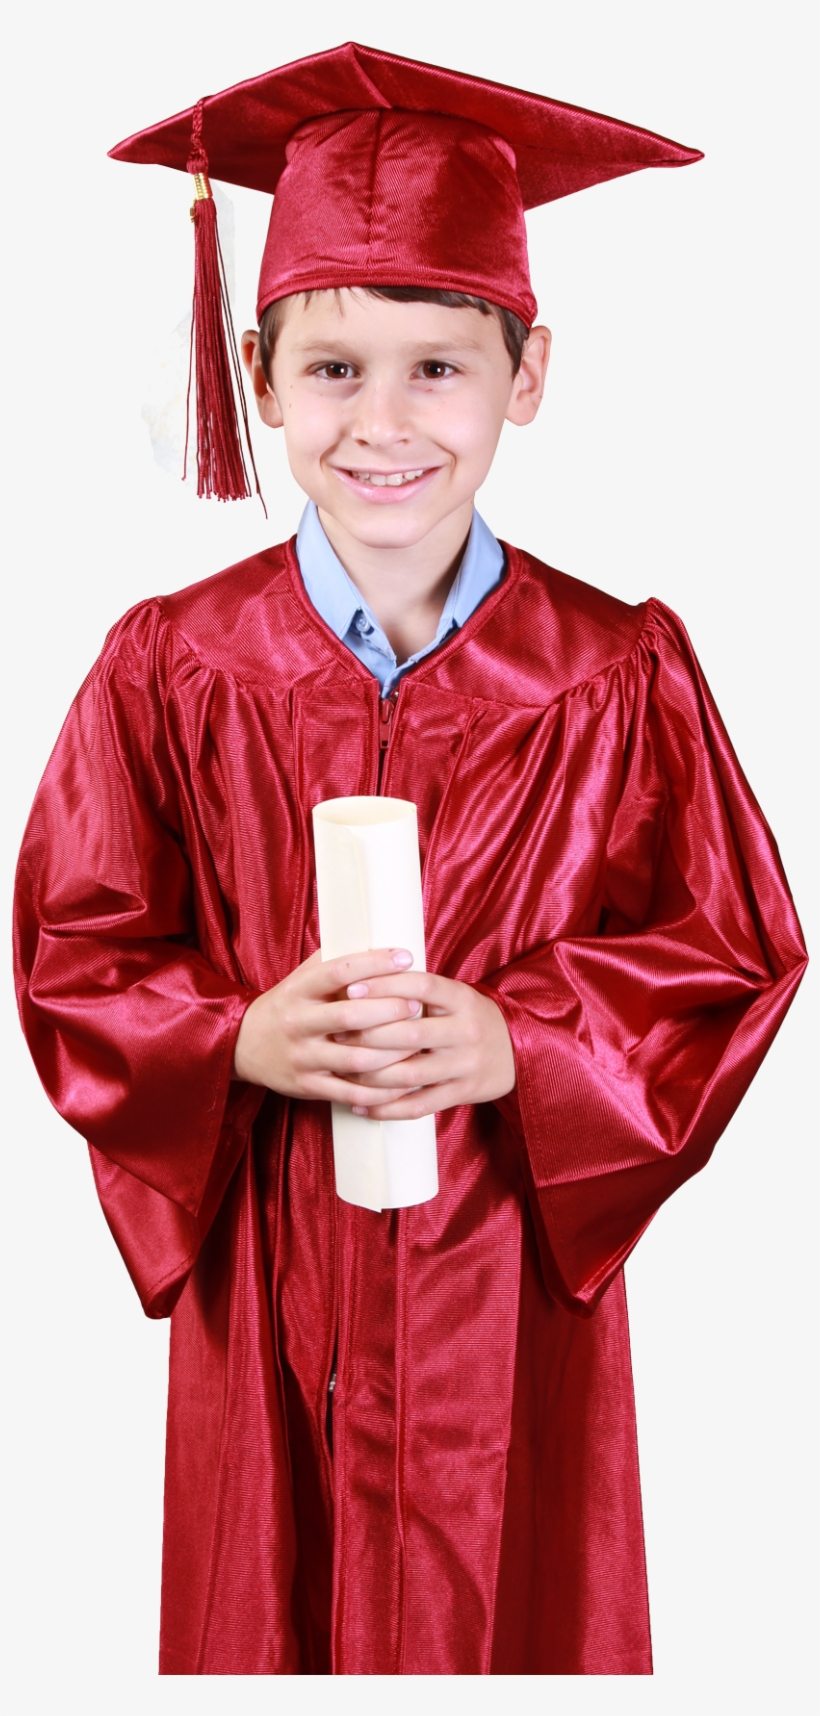 Young Boy Wearing Red Graduation Gown Png Image - Boy In Graduation Dress, transparent png #770823